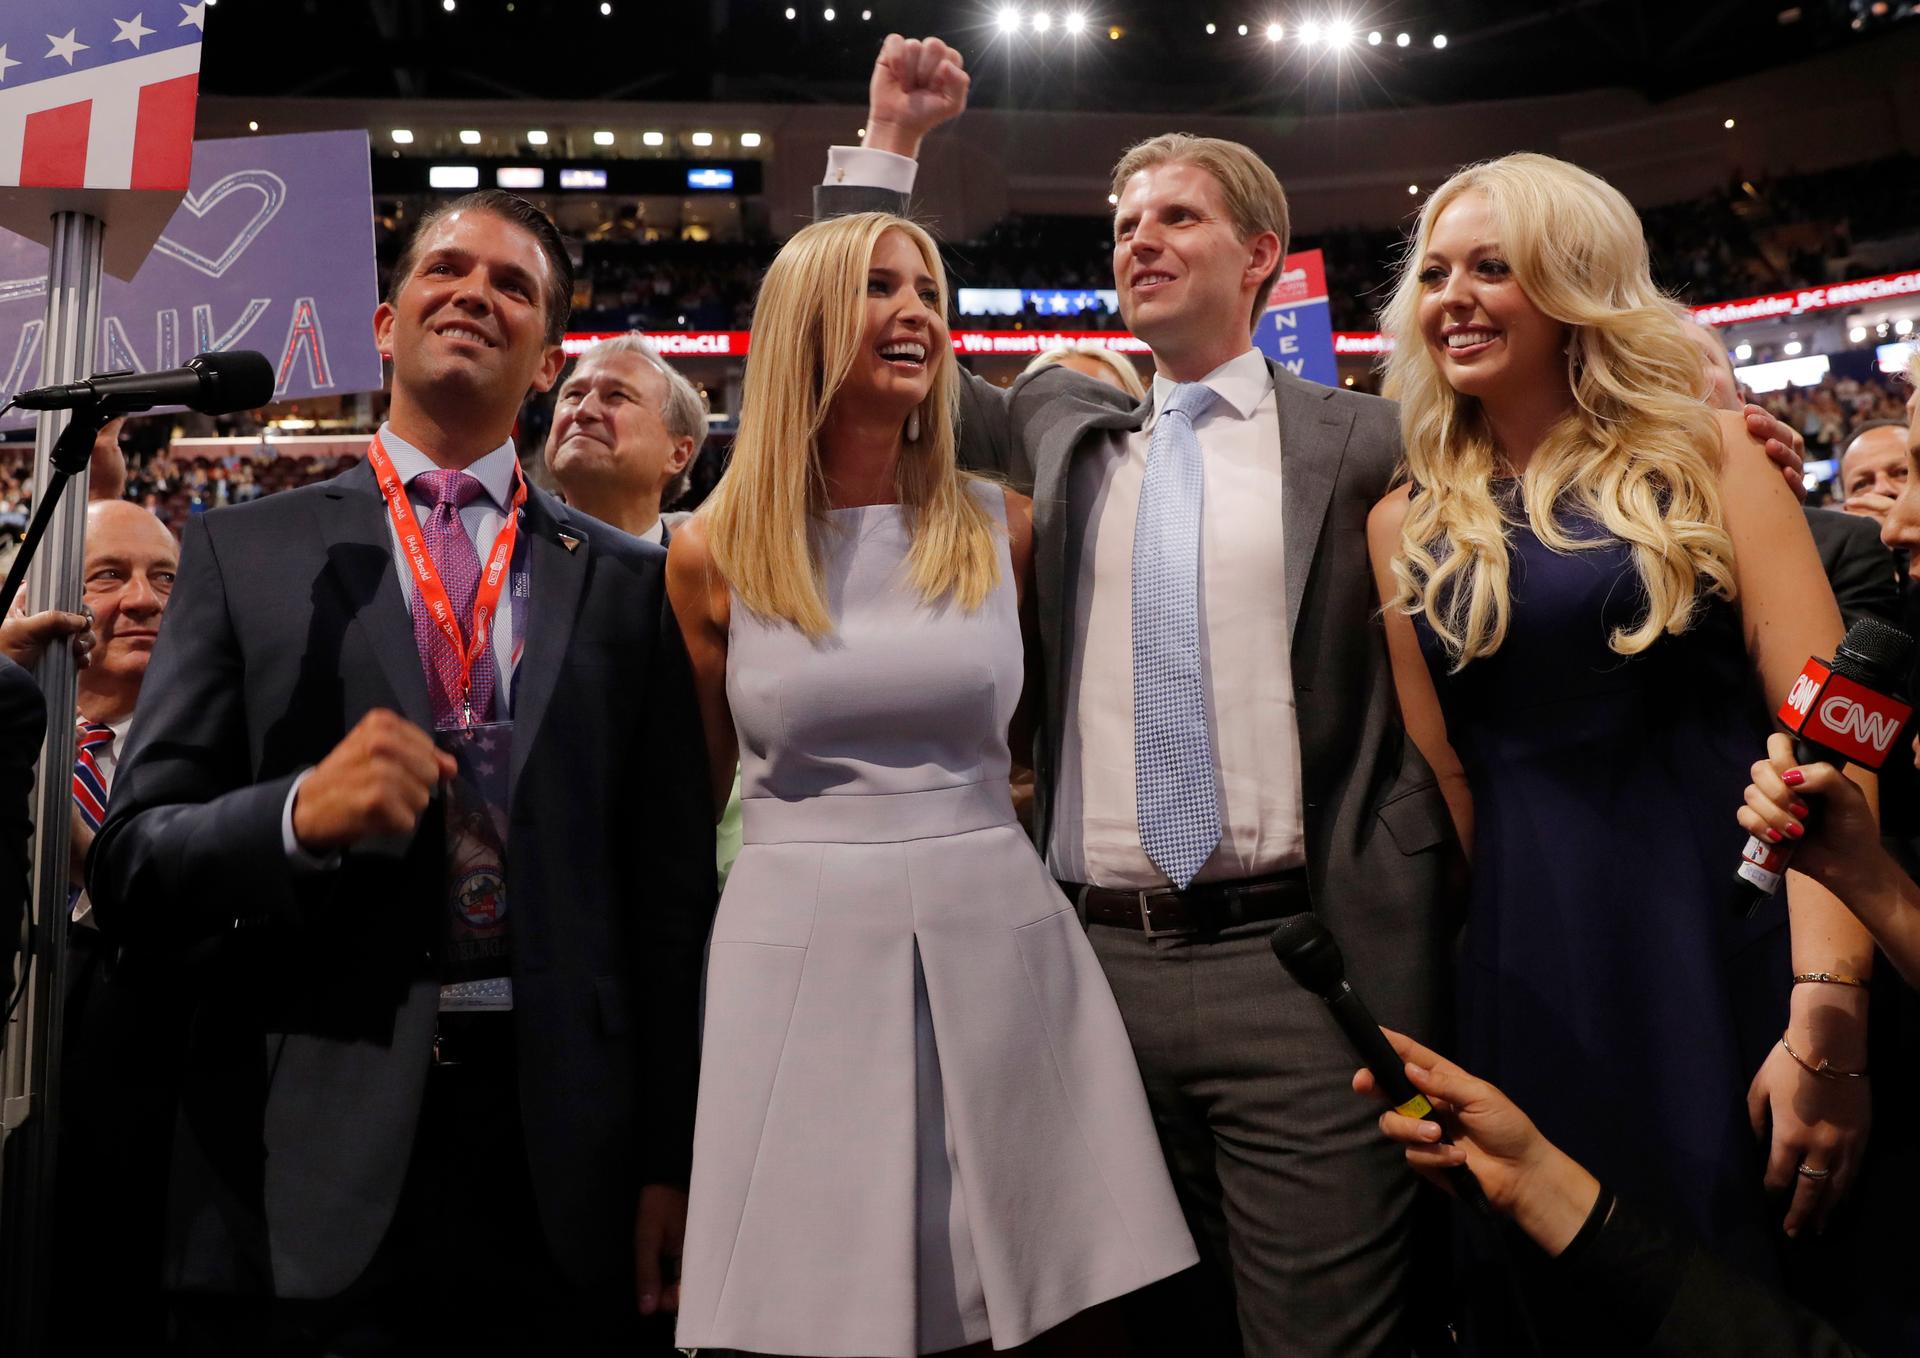 Donald Trump's children (L-R): Donald Trump Jr., Ivanka Trump, Eric Trump and Tiffany Trump, celebrate after announcing the votes of the New York delegation to put their father over the top to win the Republican presidential nomination.